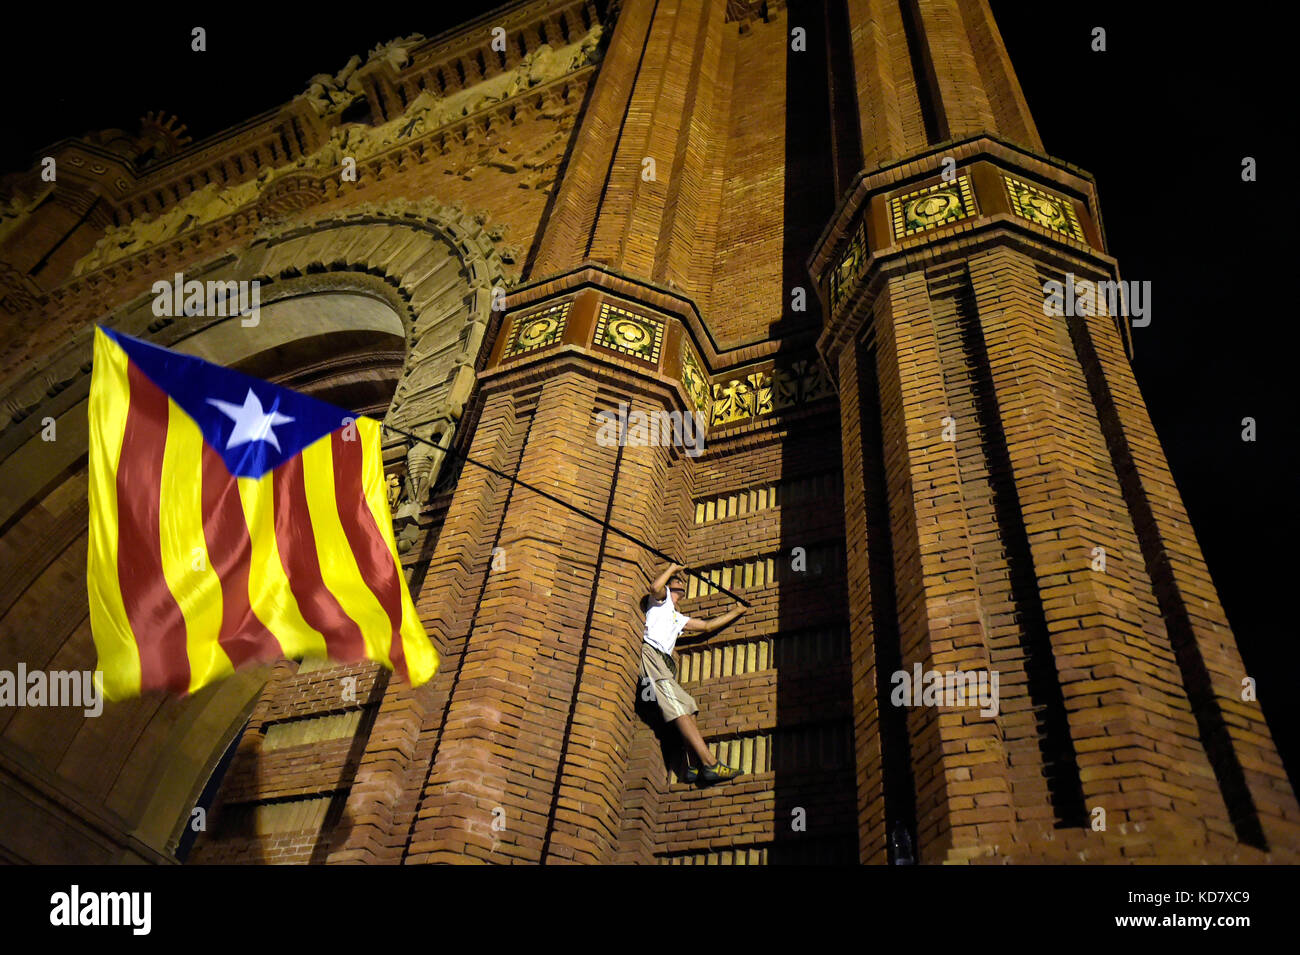 Barcelona, Spain. 10th Oct, 2017. People are waiting for the speech of the regional Catalan president Puigdemont that should declare the independency of Catalonia. Photo Credit: Danilo Balducci/Sintesi/Alamy Live News Stock Photo